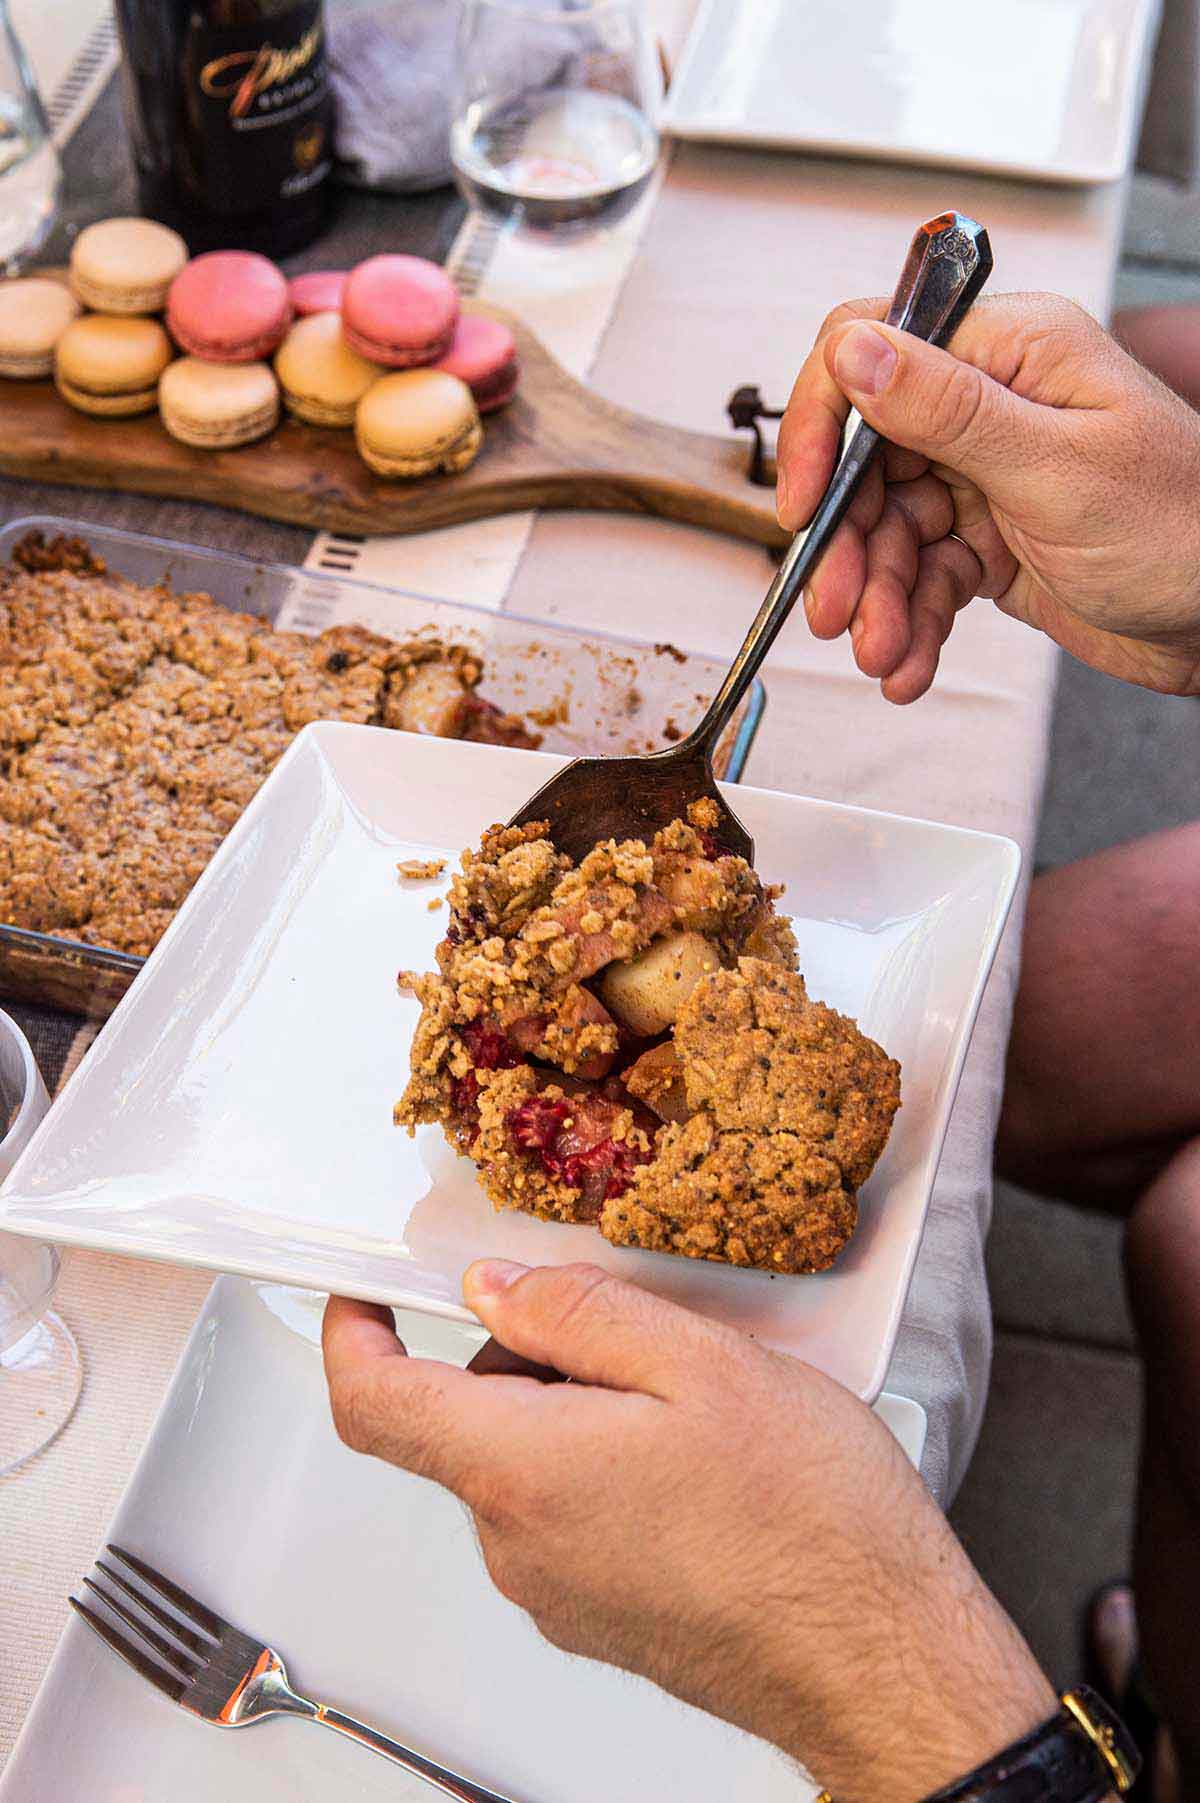 Hands serving peach crisp onto a plate with macrons in the background on a table.